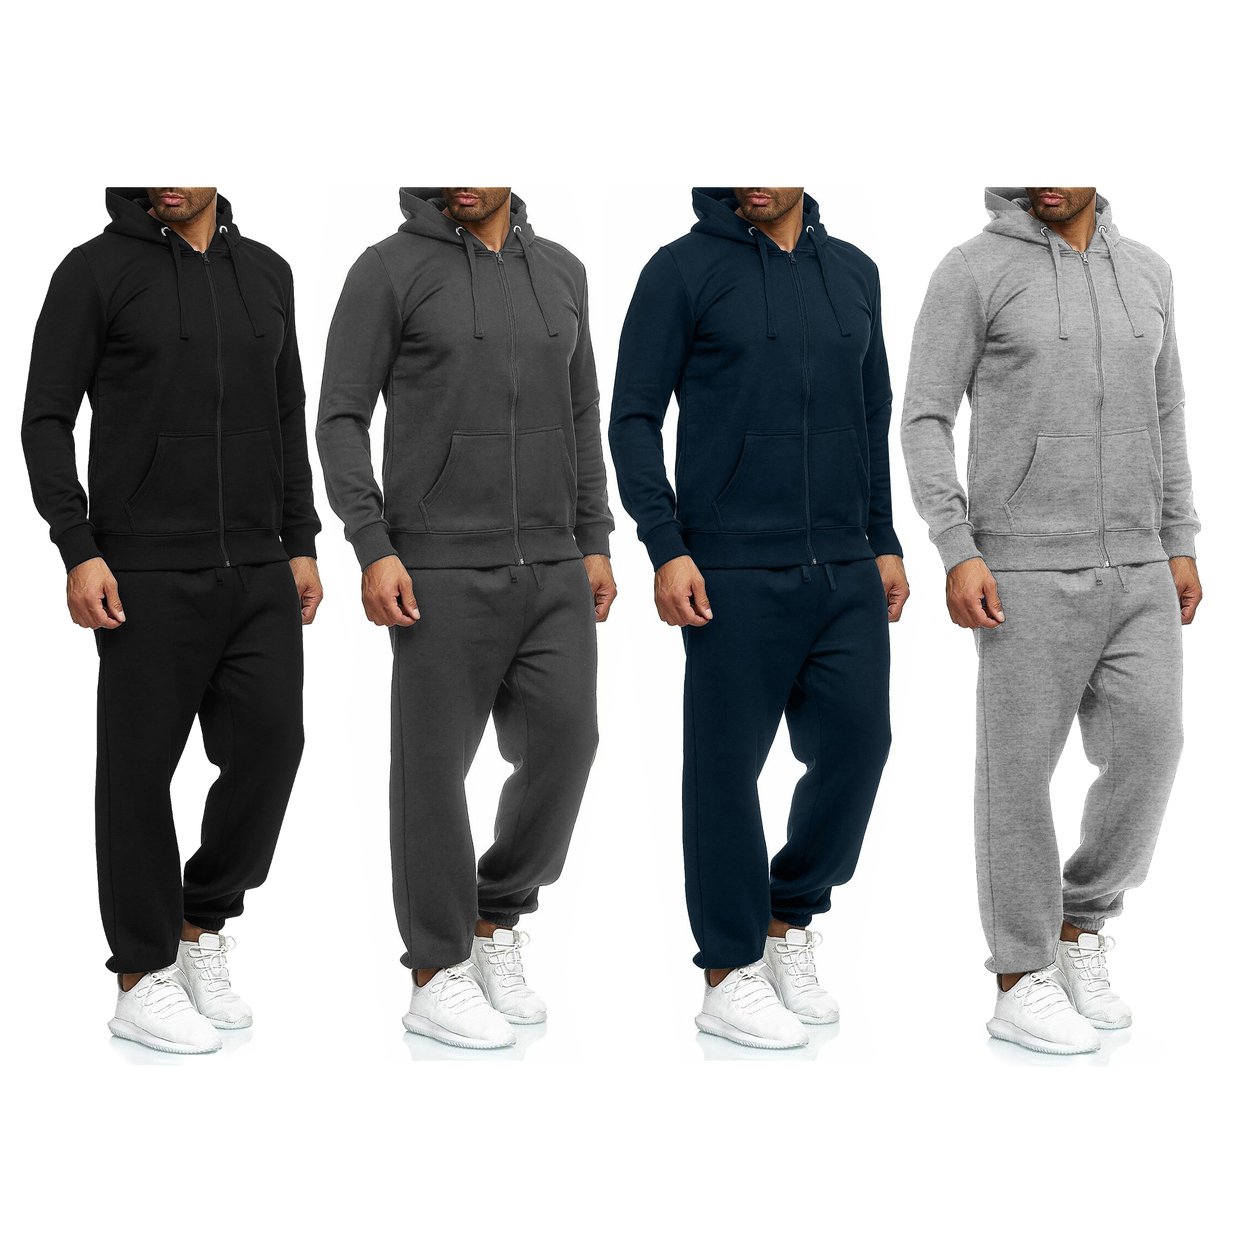 2-Pack: Men's Casual Big & Tall Athletic Active Winter Warm Fleece Lined Full Zip Tracksuit Jogger Set - Grey, Large